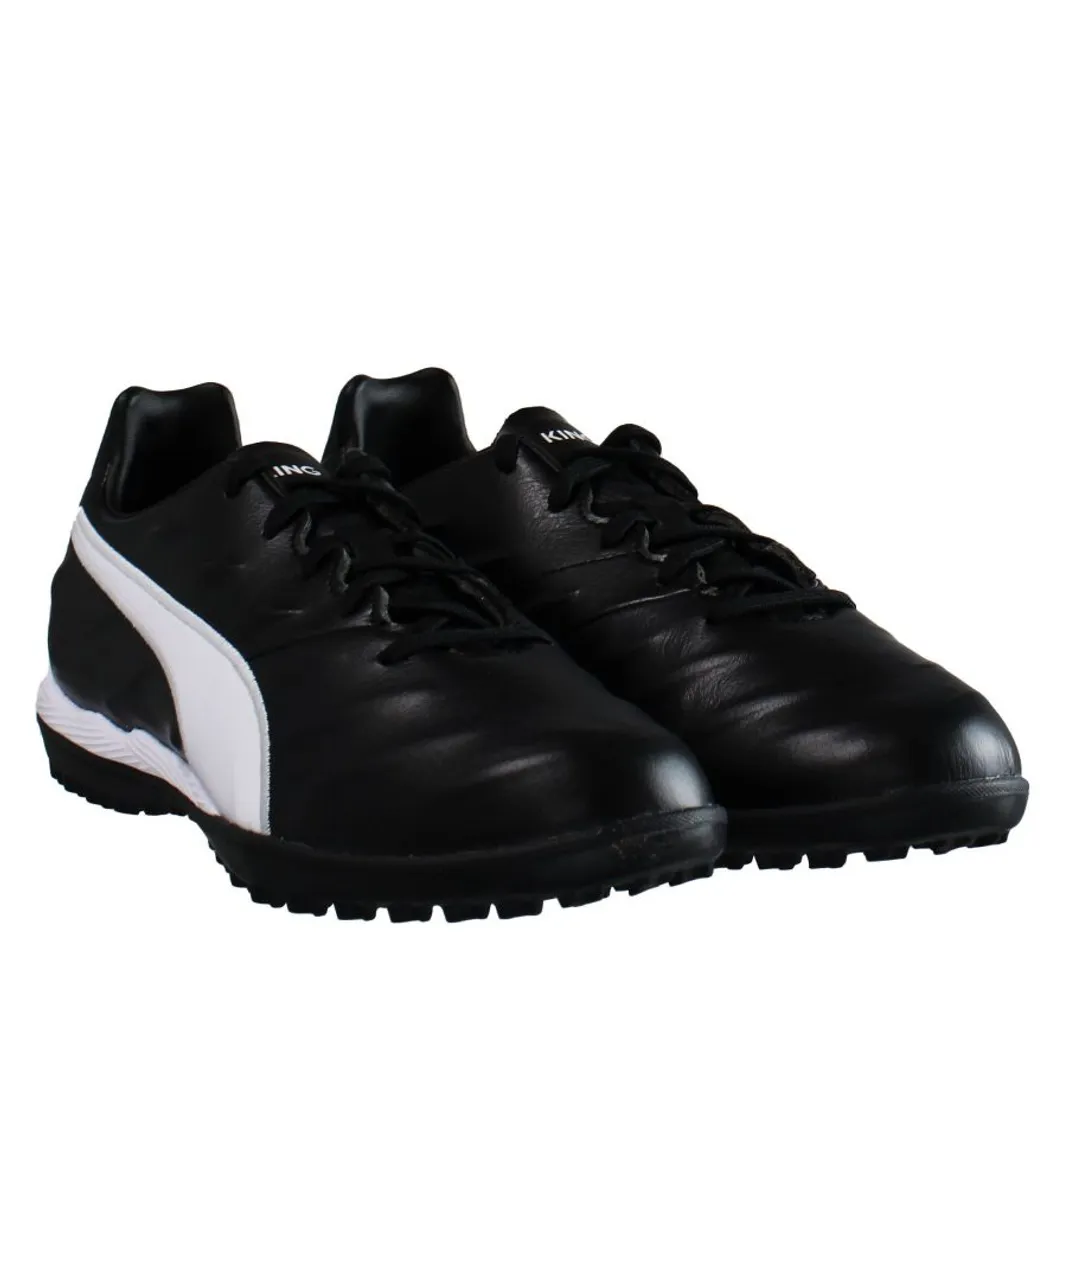 Puma King Pro 21 TT Black Mens Football Boots Leather (archived)